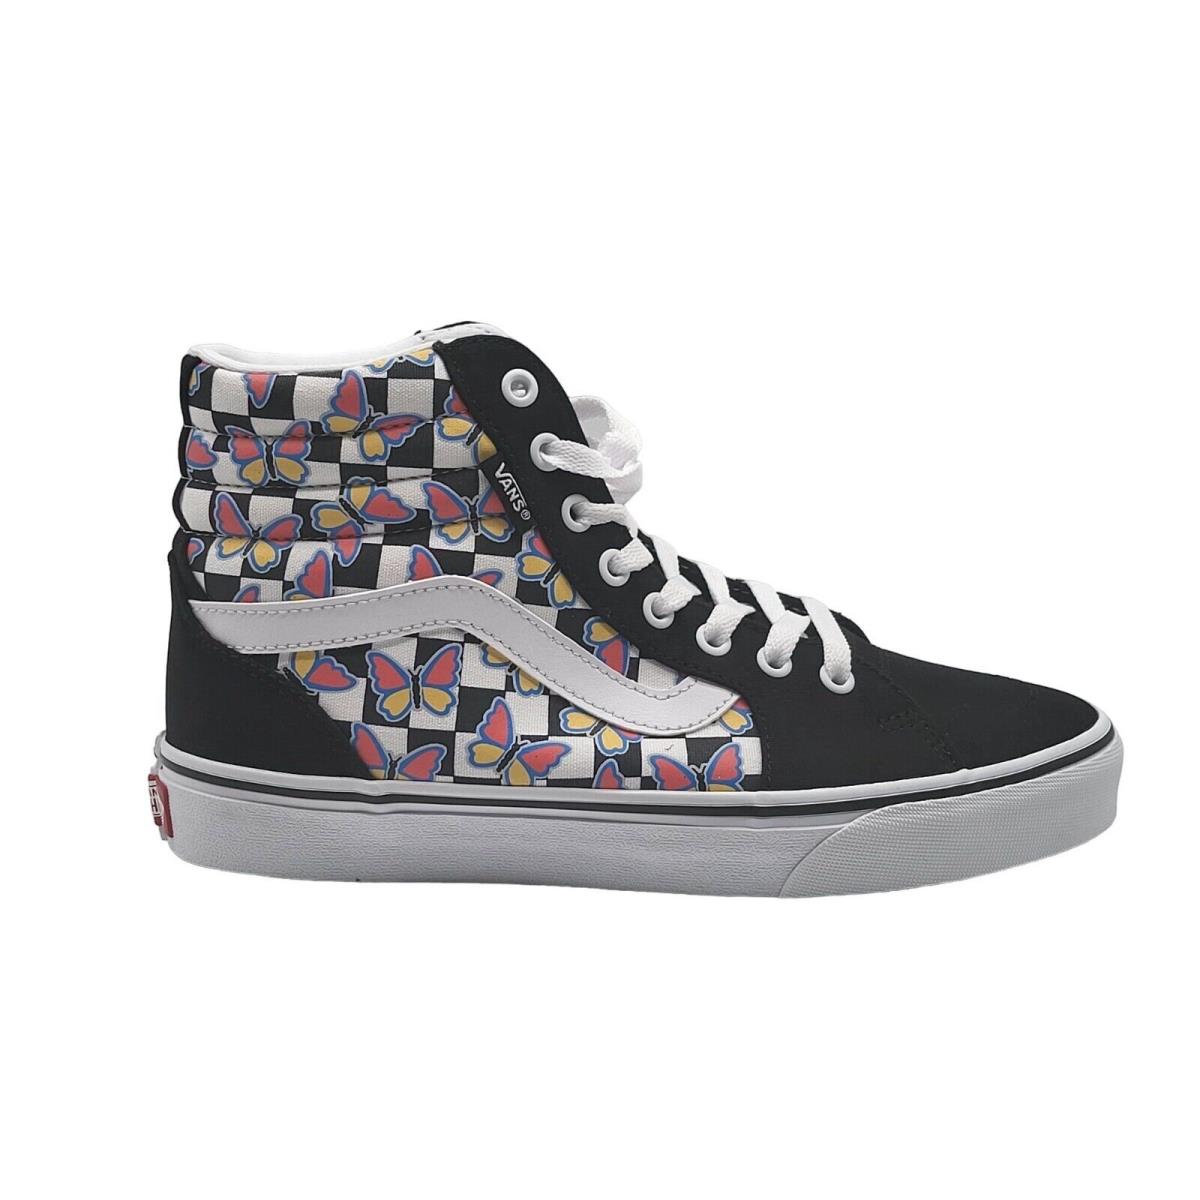 Vans Womens Filmore Hi Butterfly Checkerboard Shoes Size 9 - Multicolor